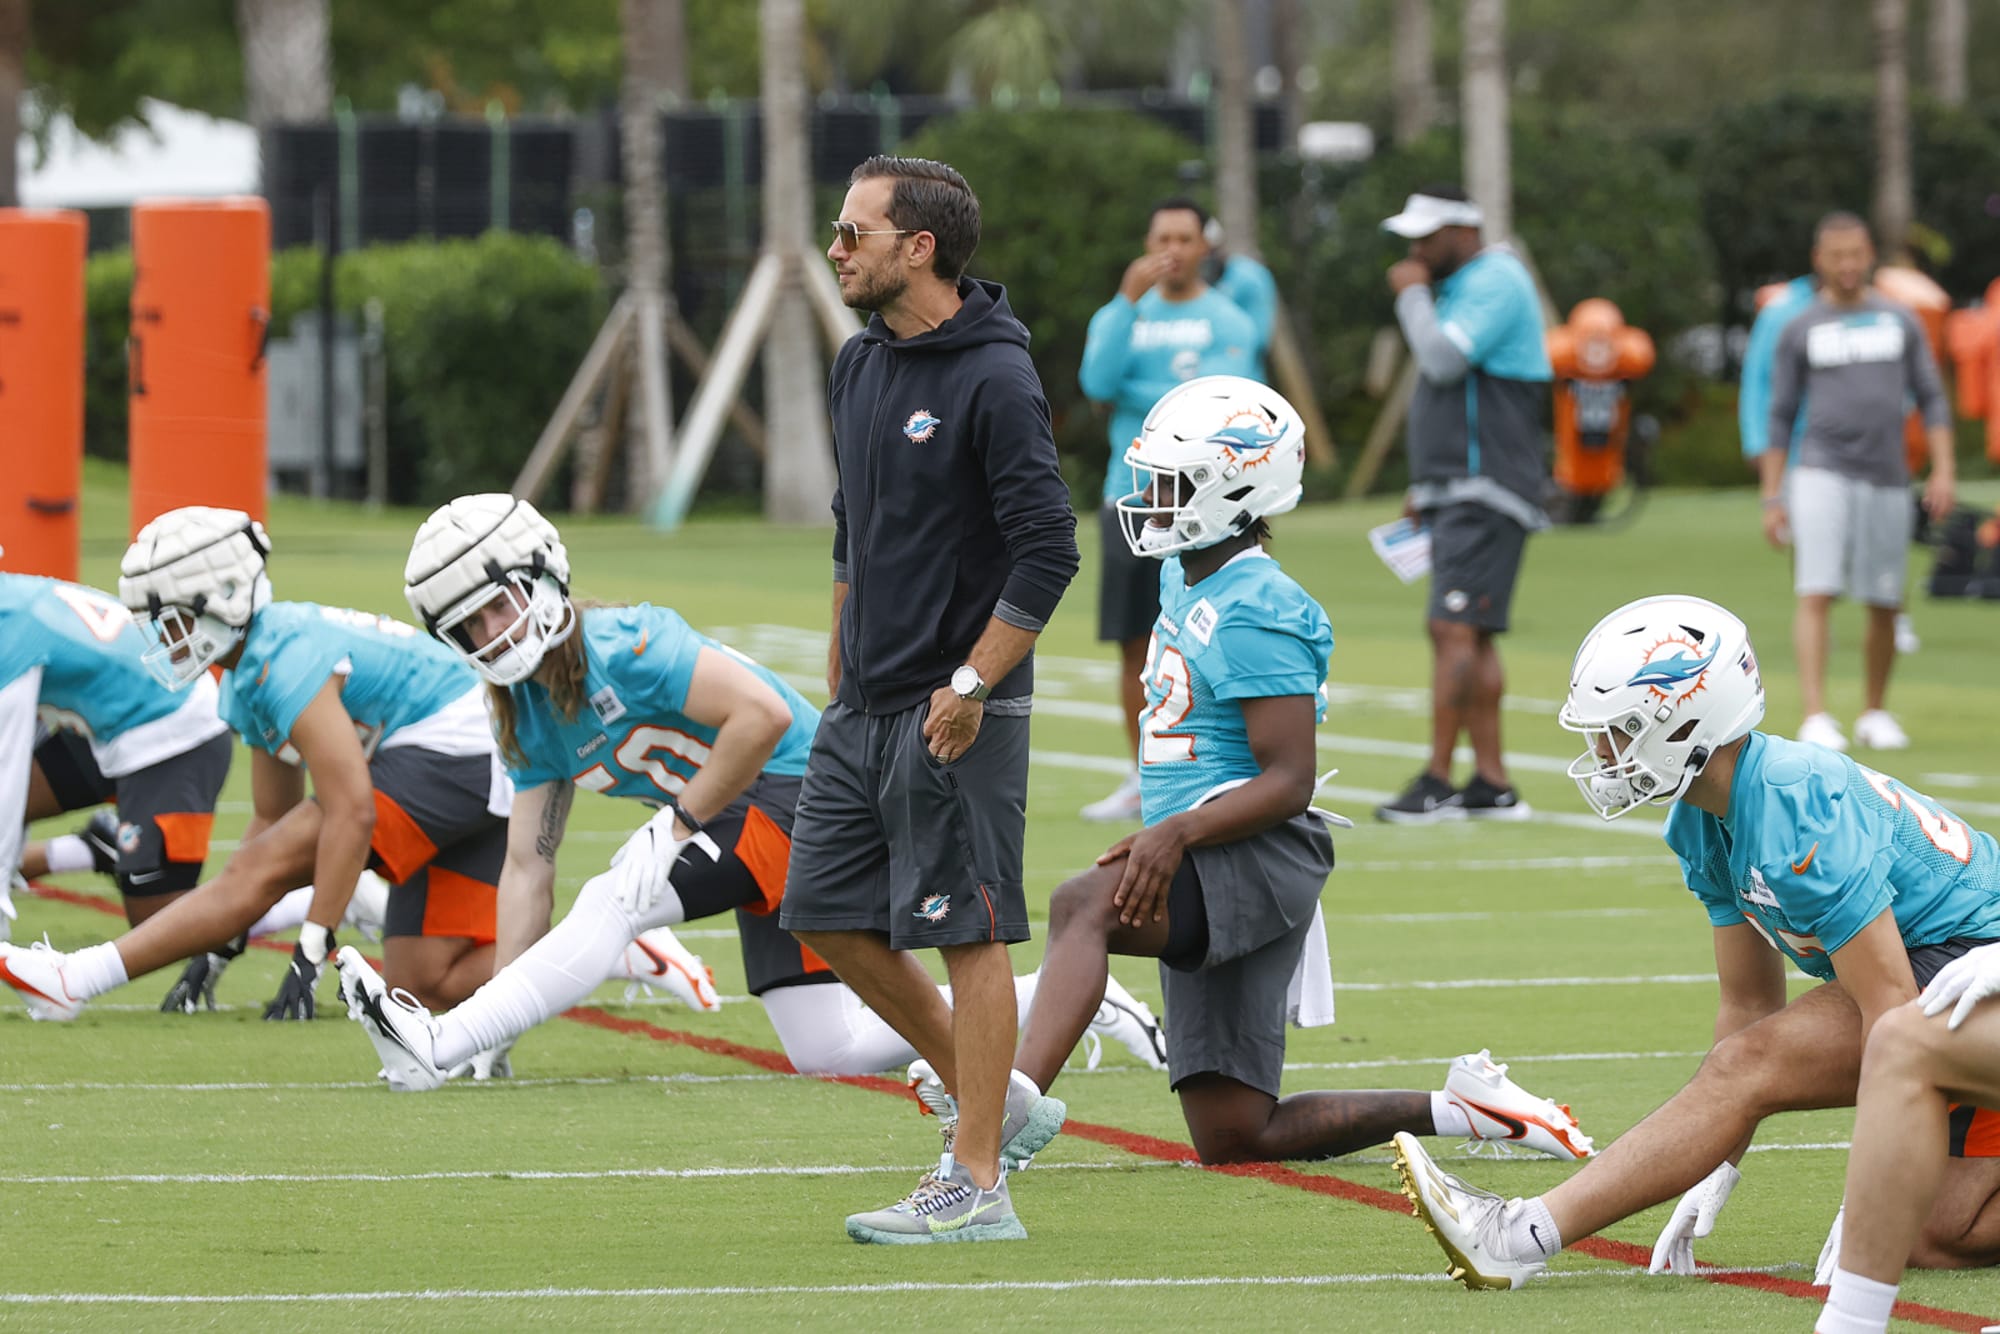 Miami Dolphins players "can't believe" how good the new offense looks